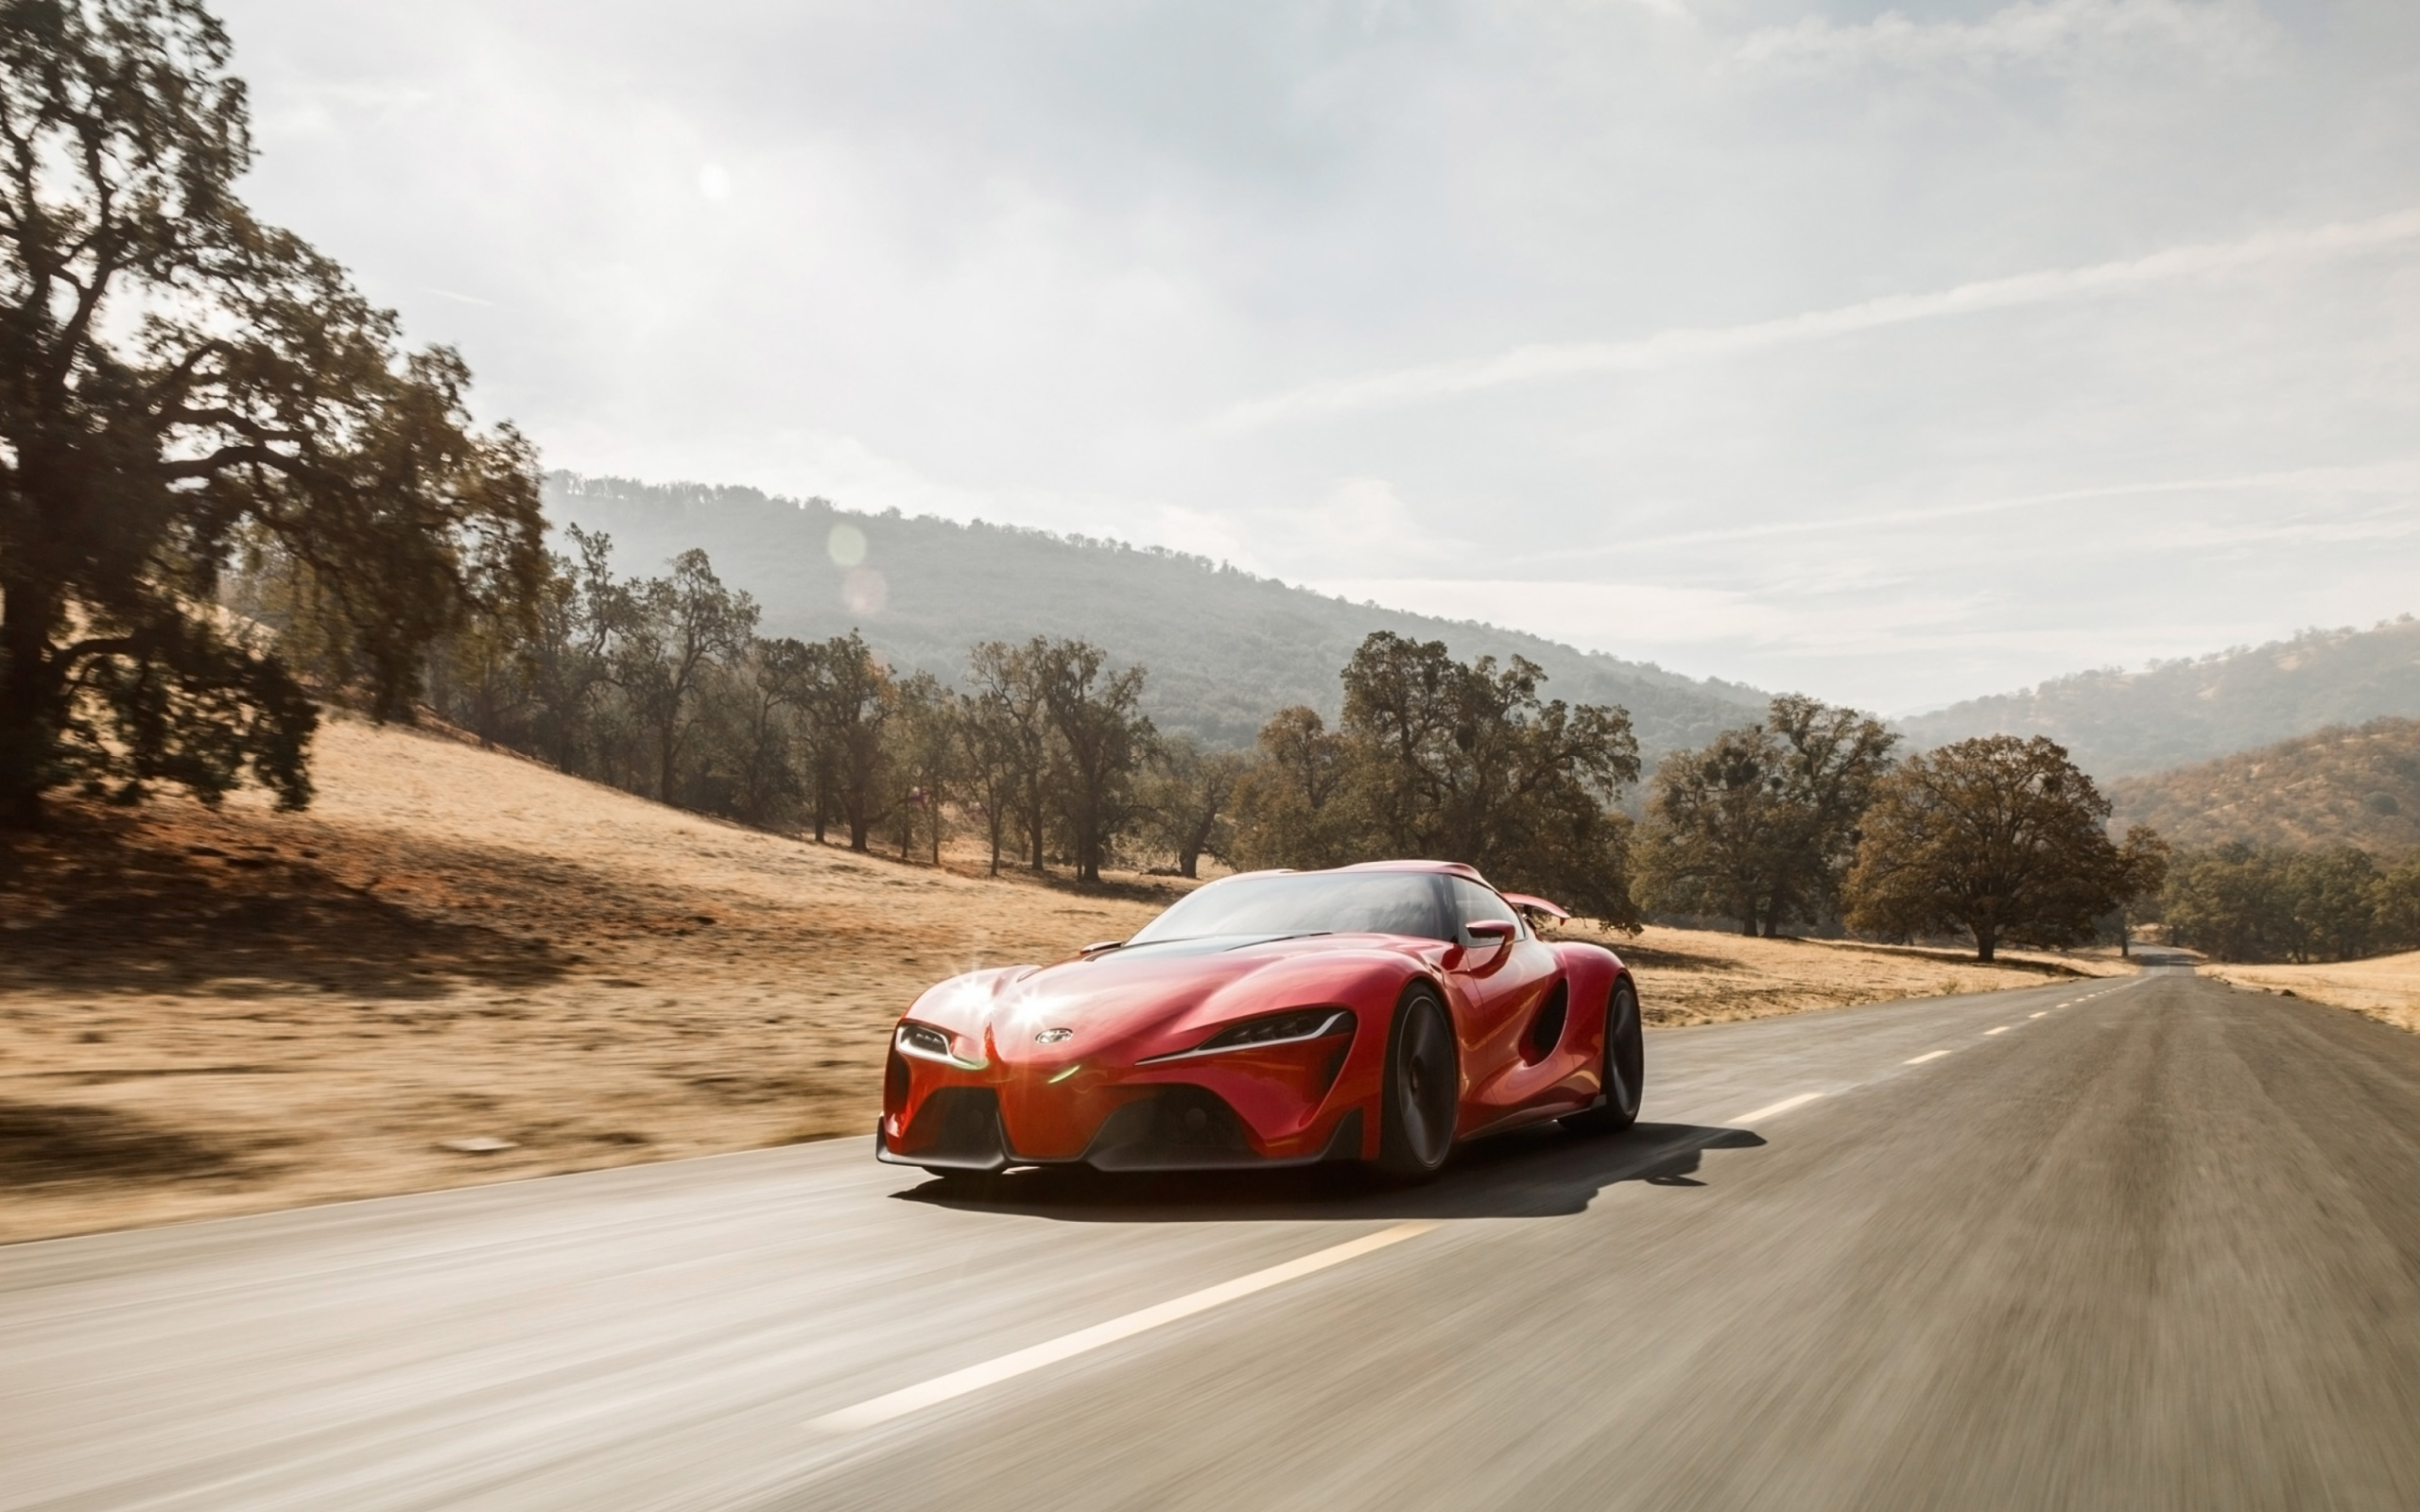 Das 2014 Toyota Ft 1 Concept Front Angle Wallpaper 2560x1600